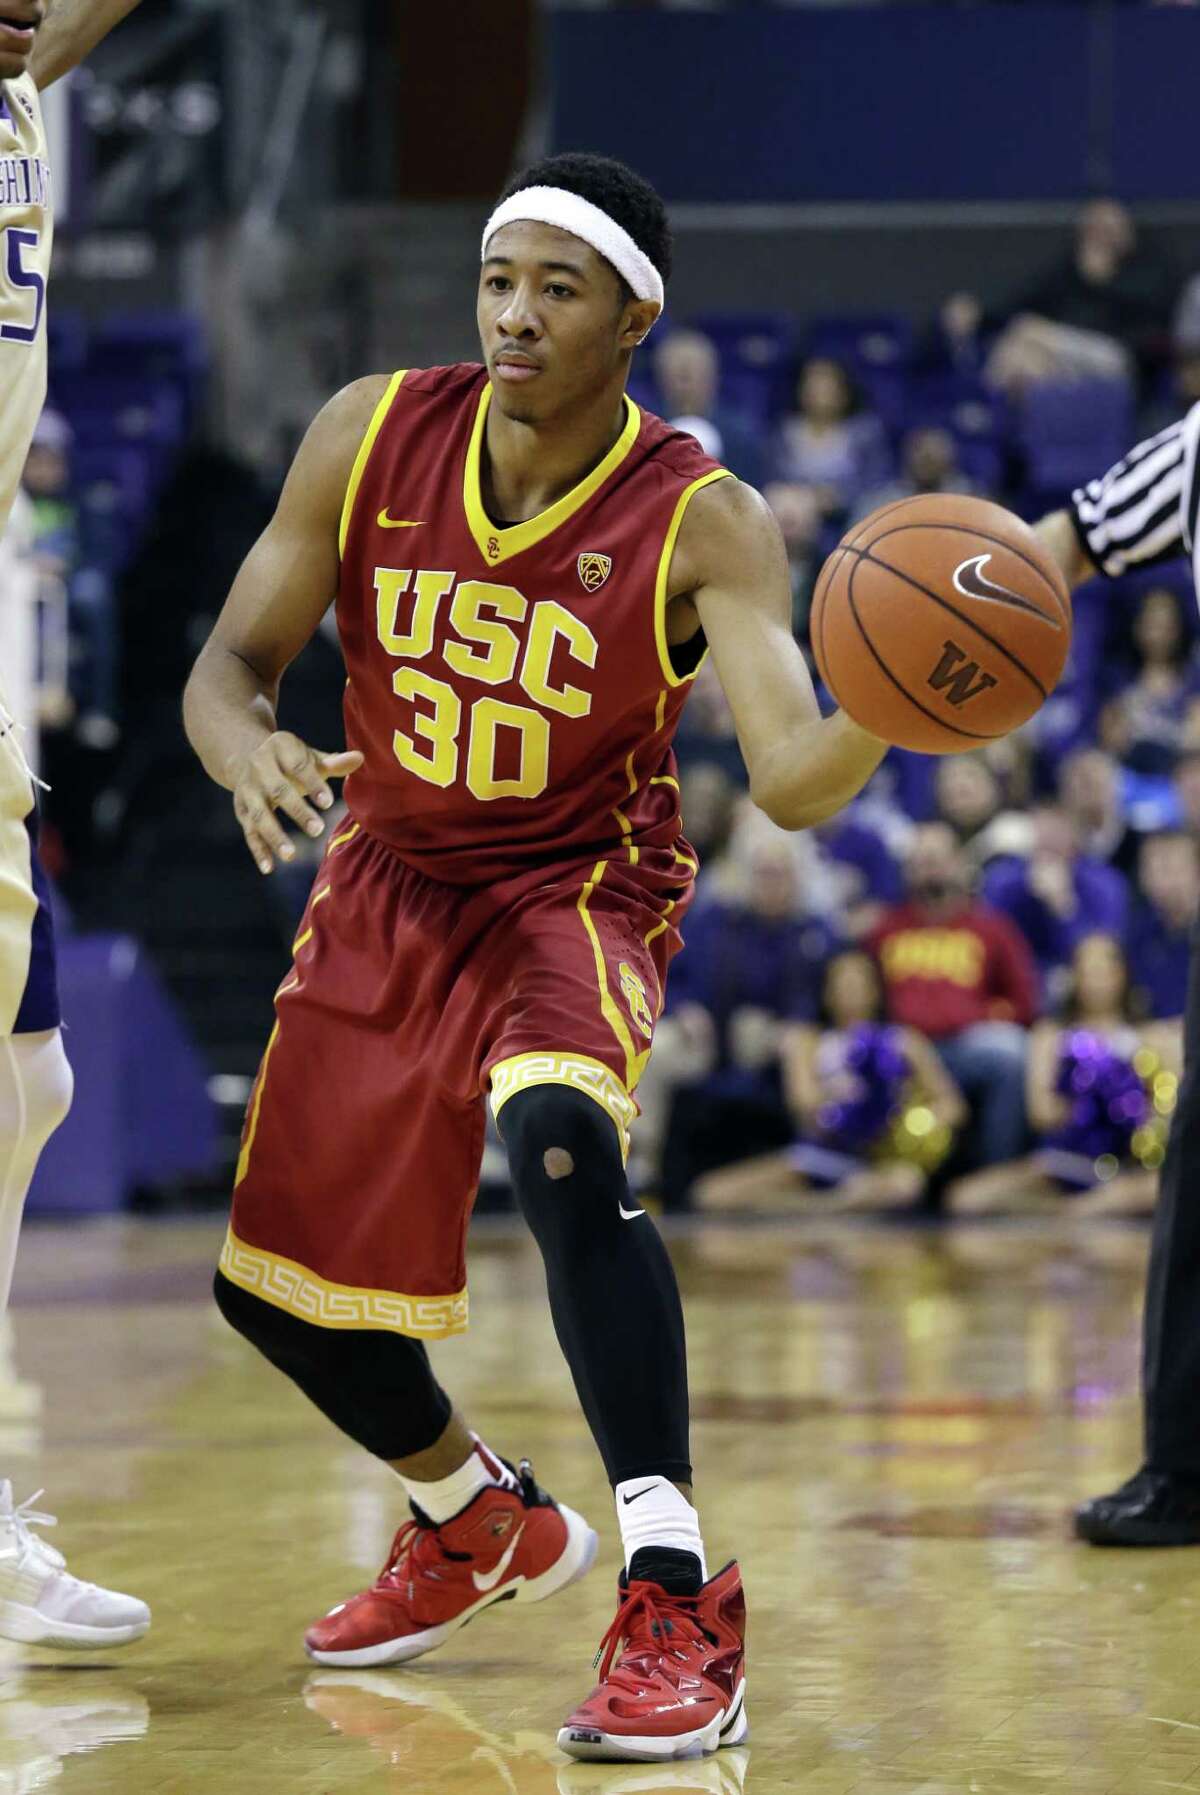 2. USC 103, Arizona 101 - The Trojans escaped with a win in quadruple overtime on Saturday. Guard Elijah Stewart had 27 points off the bench, including two free throws that would be the final two points of the game.